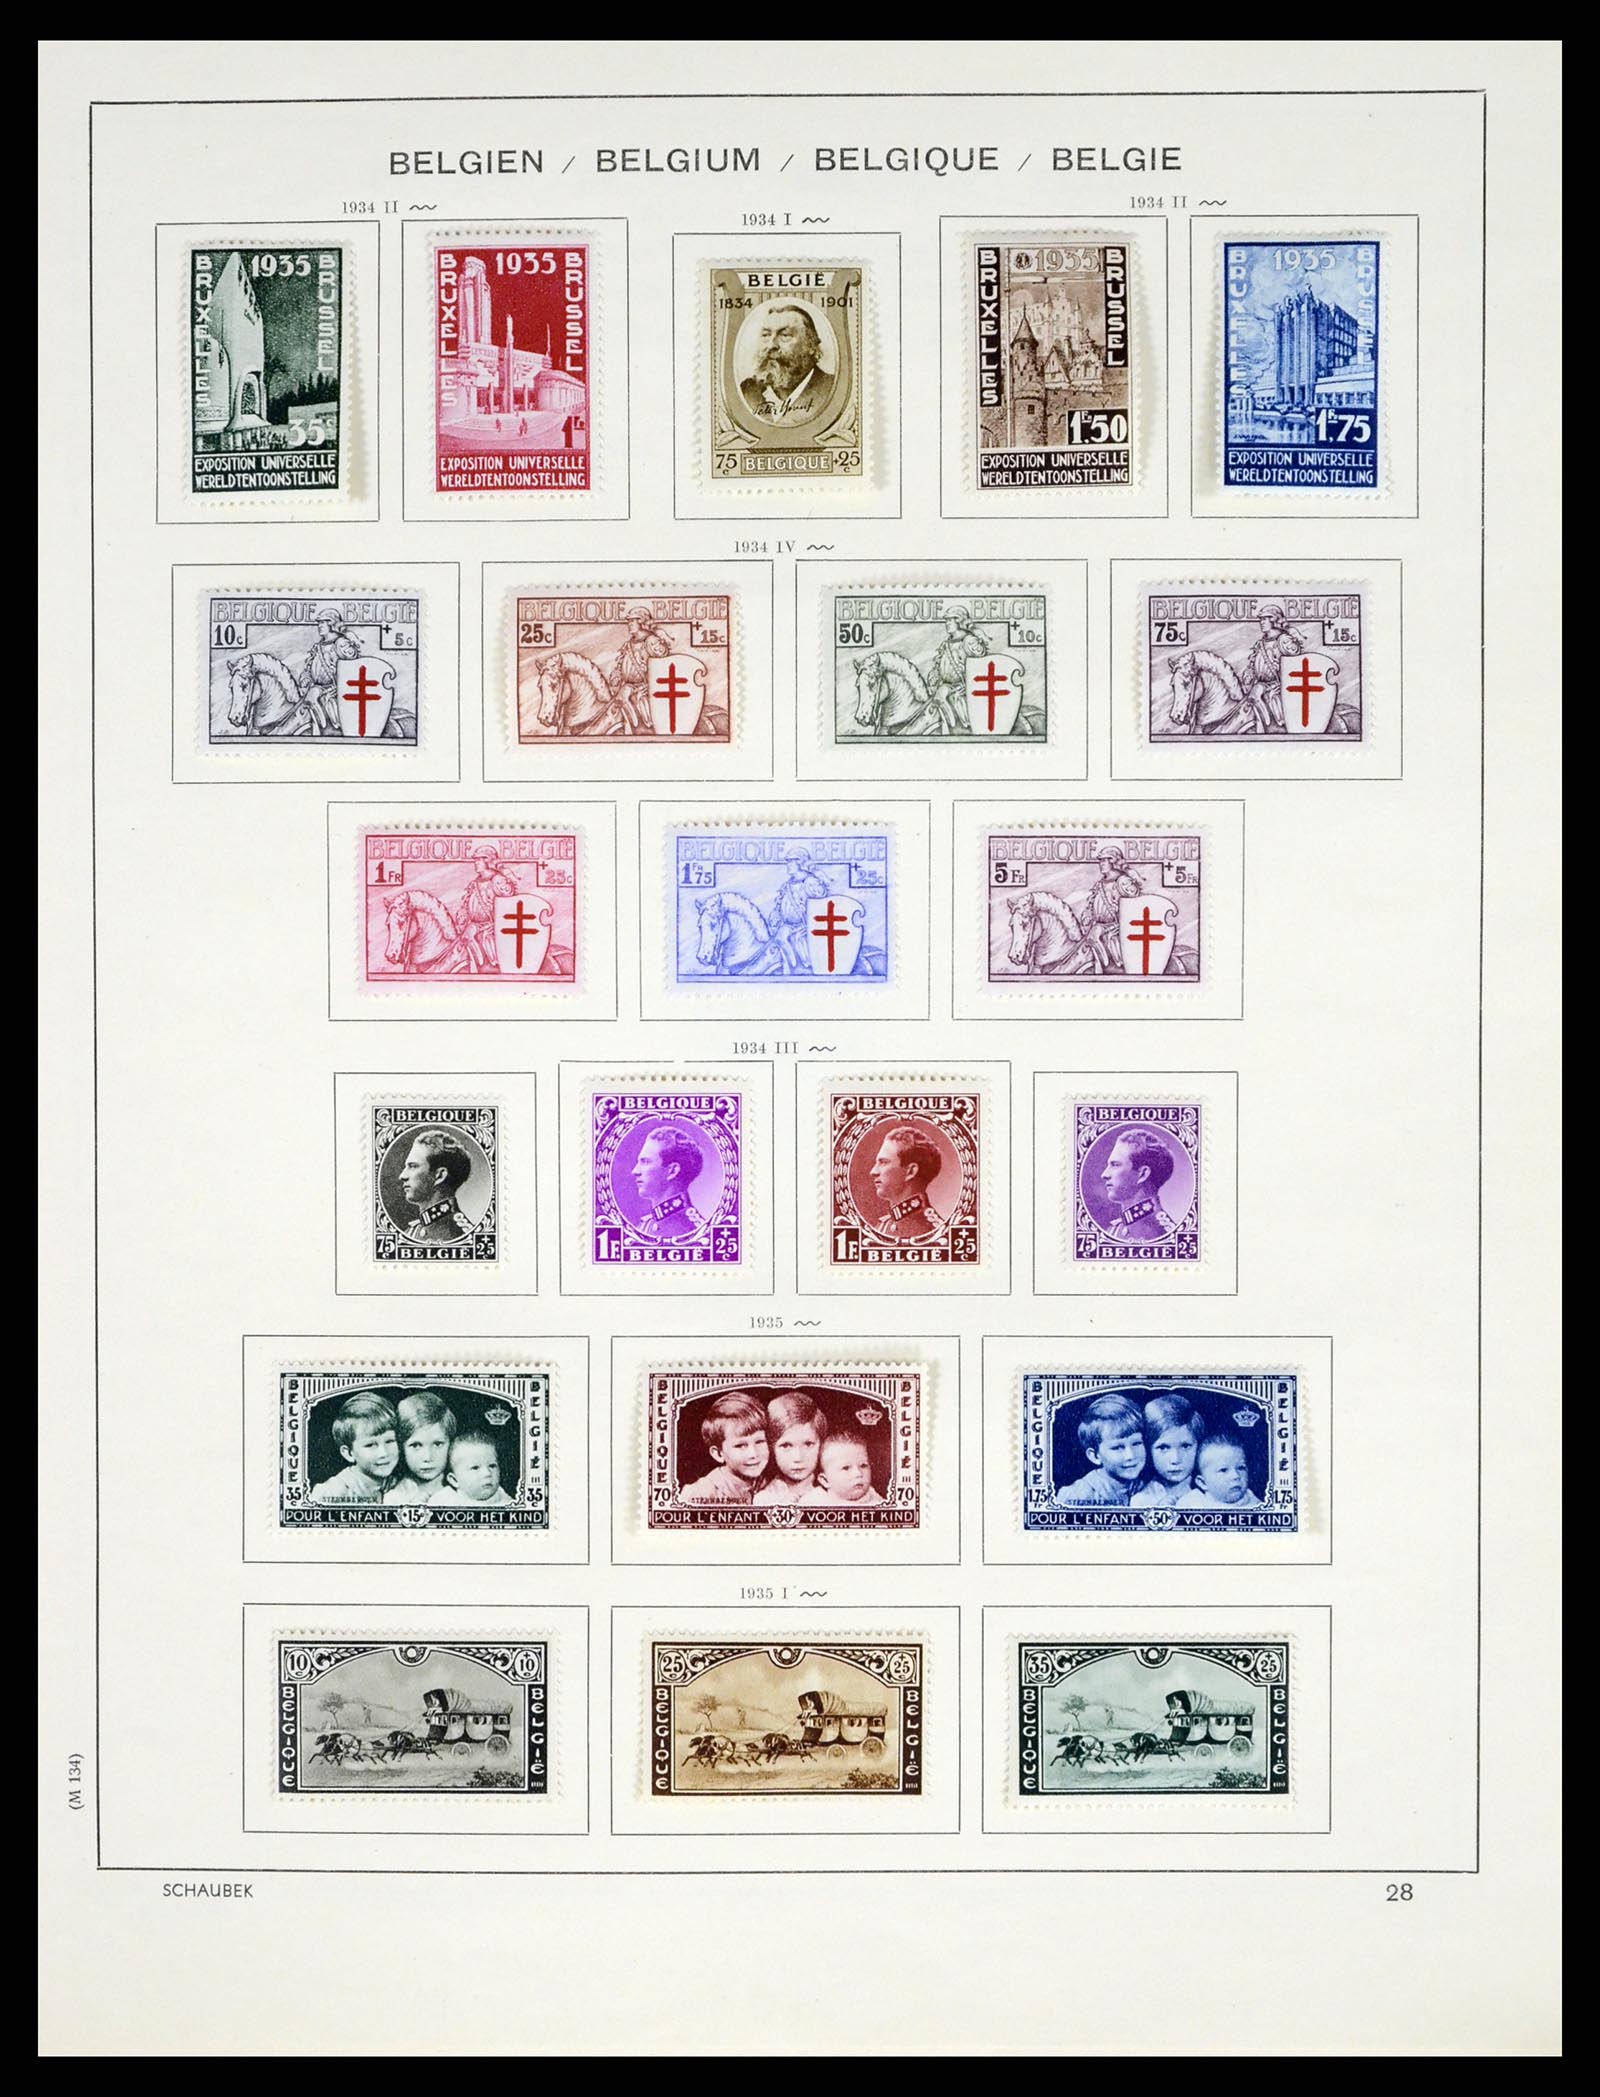 37595 025 - Stamp collection 37595 Super collection Belgium 1849-2015!